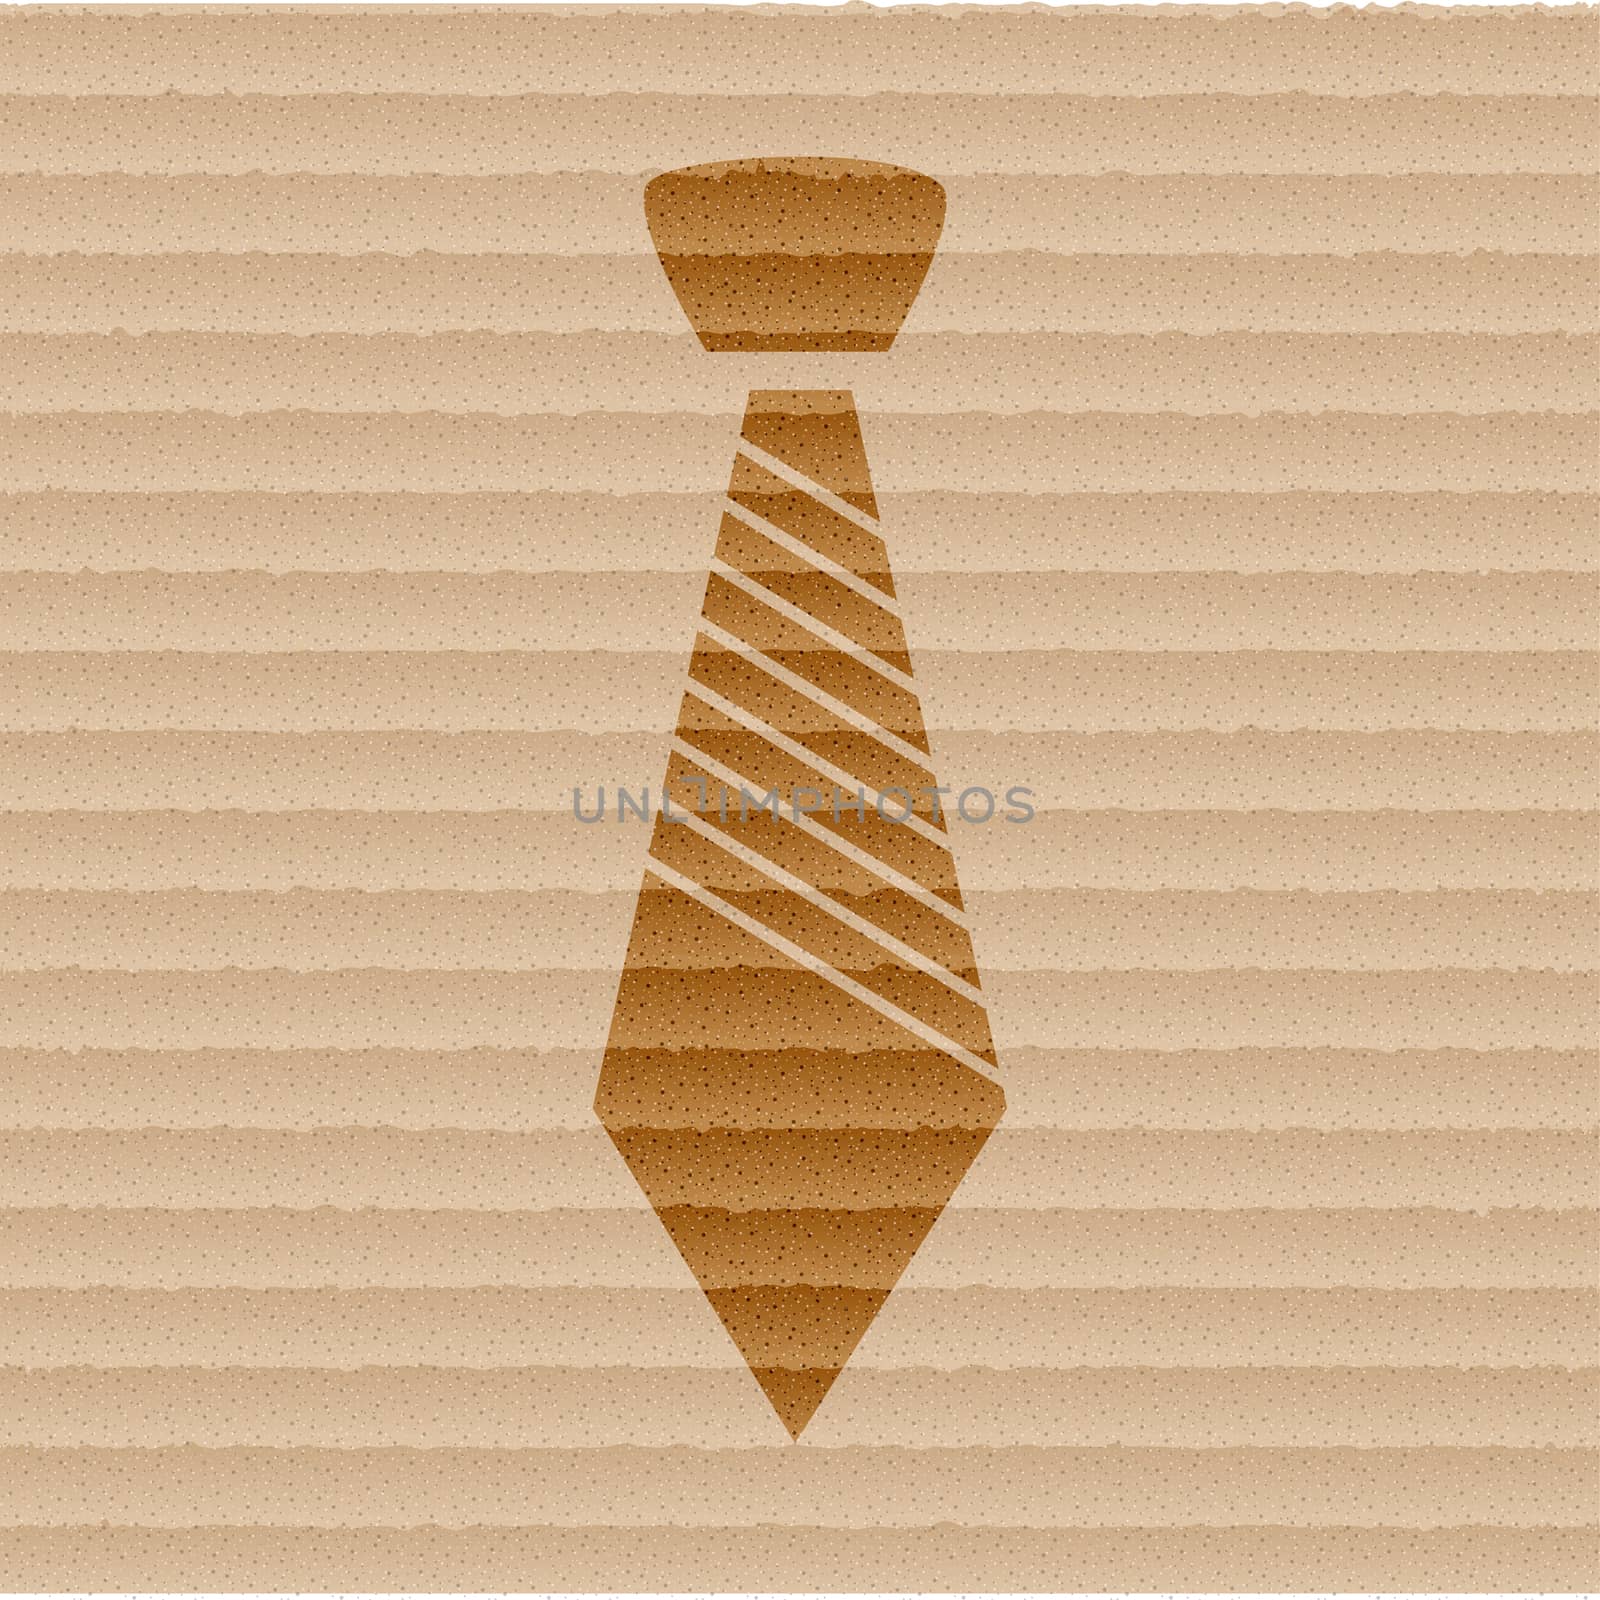 tie icon flat design with abstract background by serhii_lohvyniuk